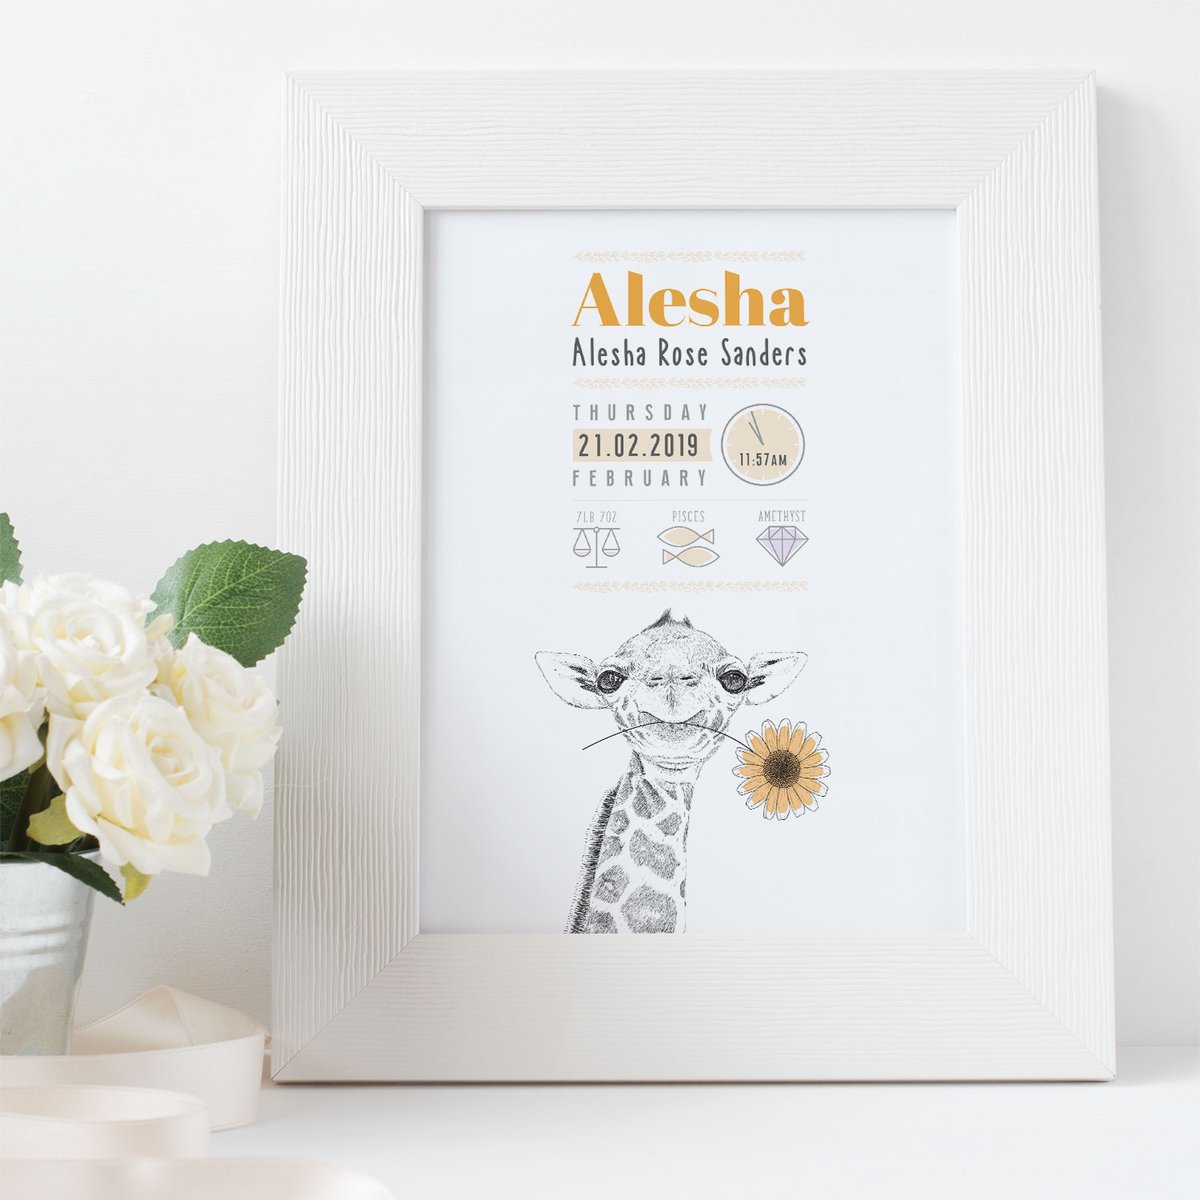 🎈🍼 Personalised Birth Details Nursery Art - Perfect for a #newbabygift / #christeninggift!  On ordering will be in touch to add your personalisation. Colour scheme can change too 😍
ow.ly/ukEx50xsCh8 
#nurseryart #nurseryideas #newbaby #newbabygift #shopindie  #shoplocal